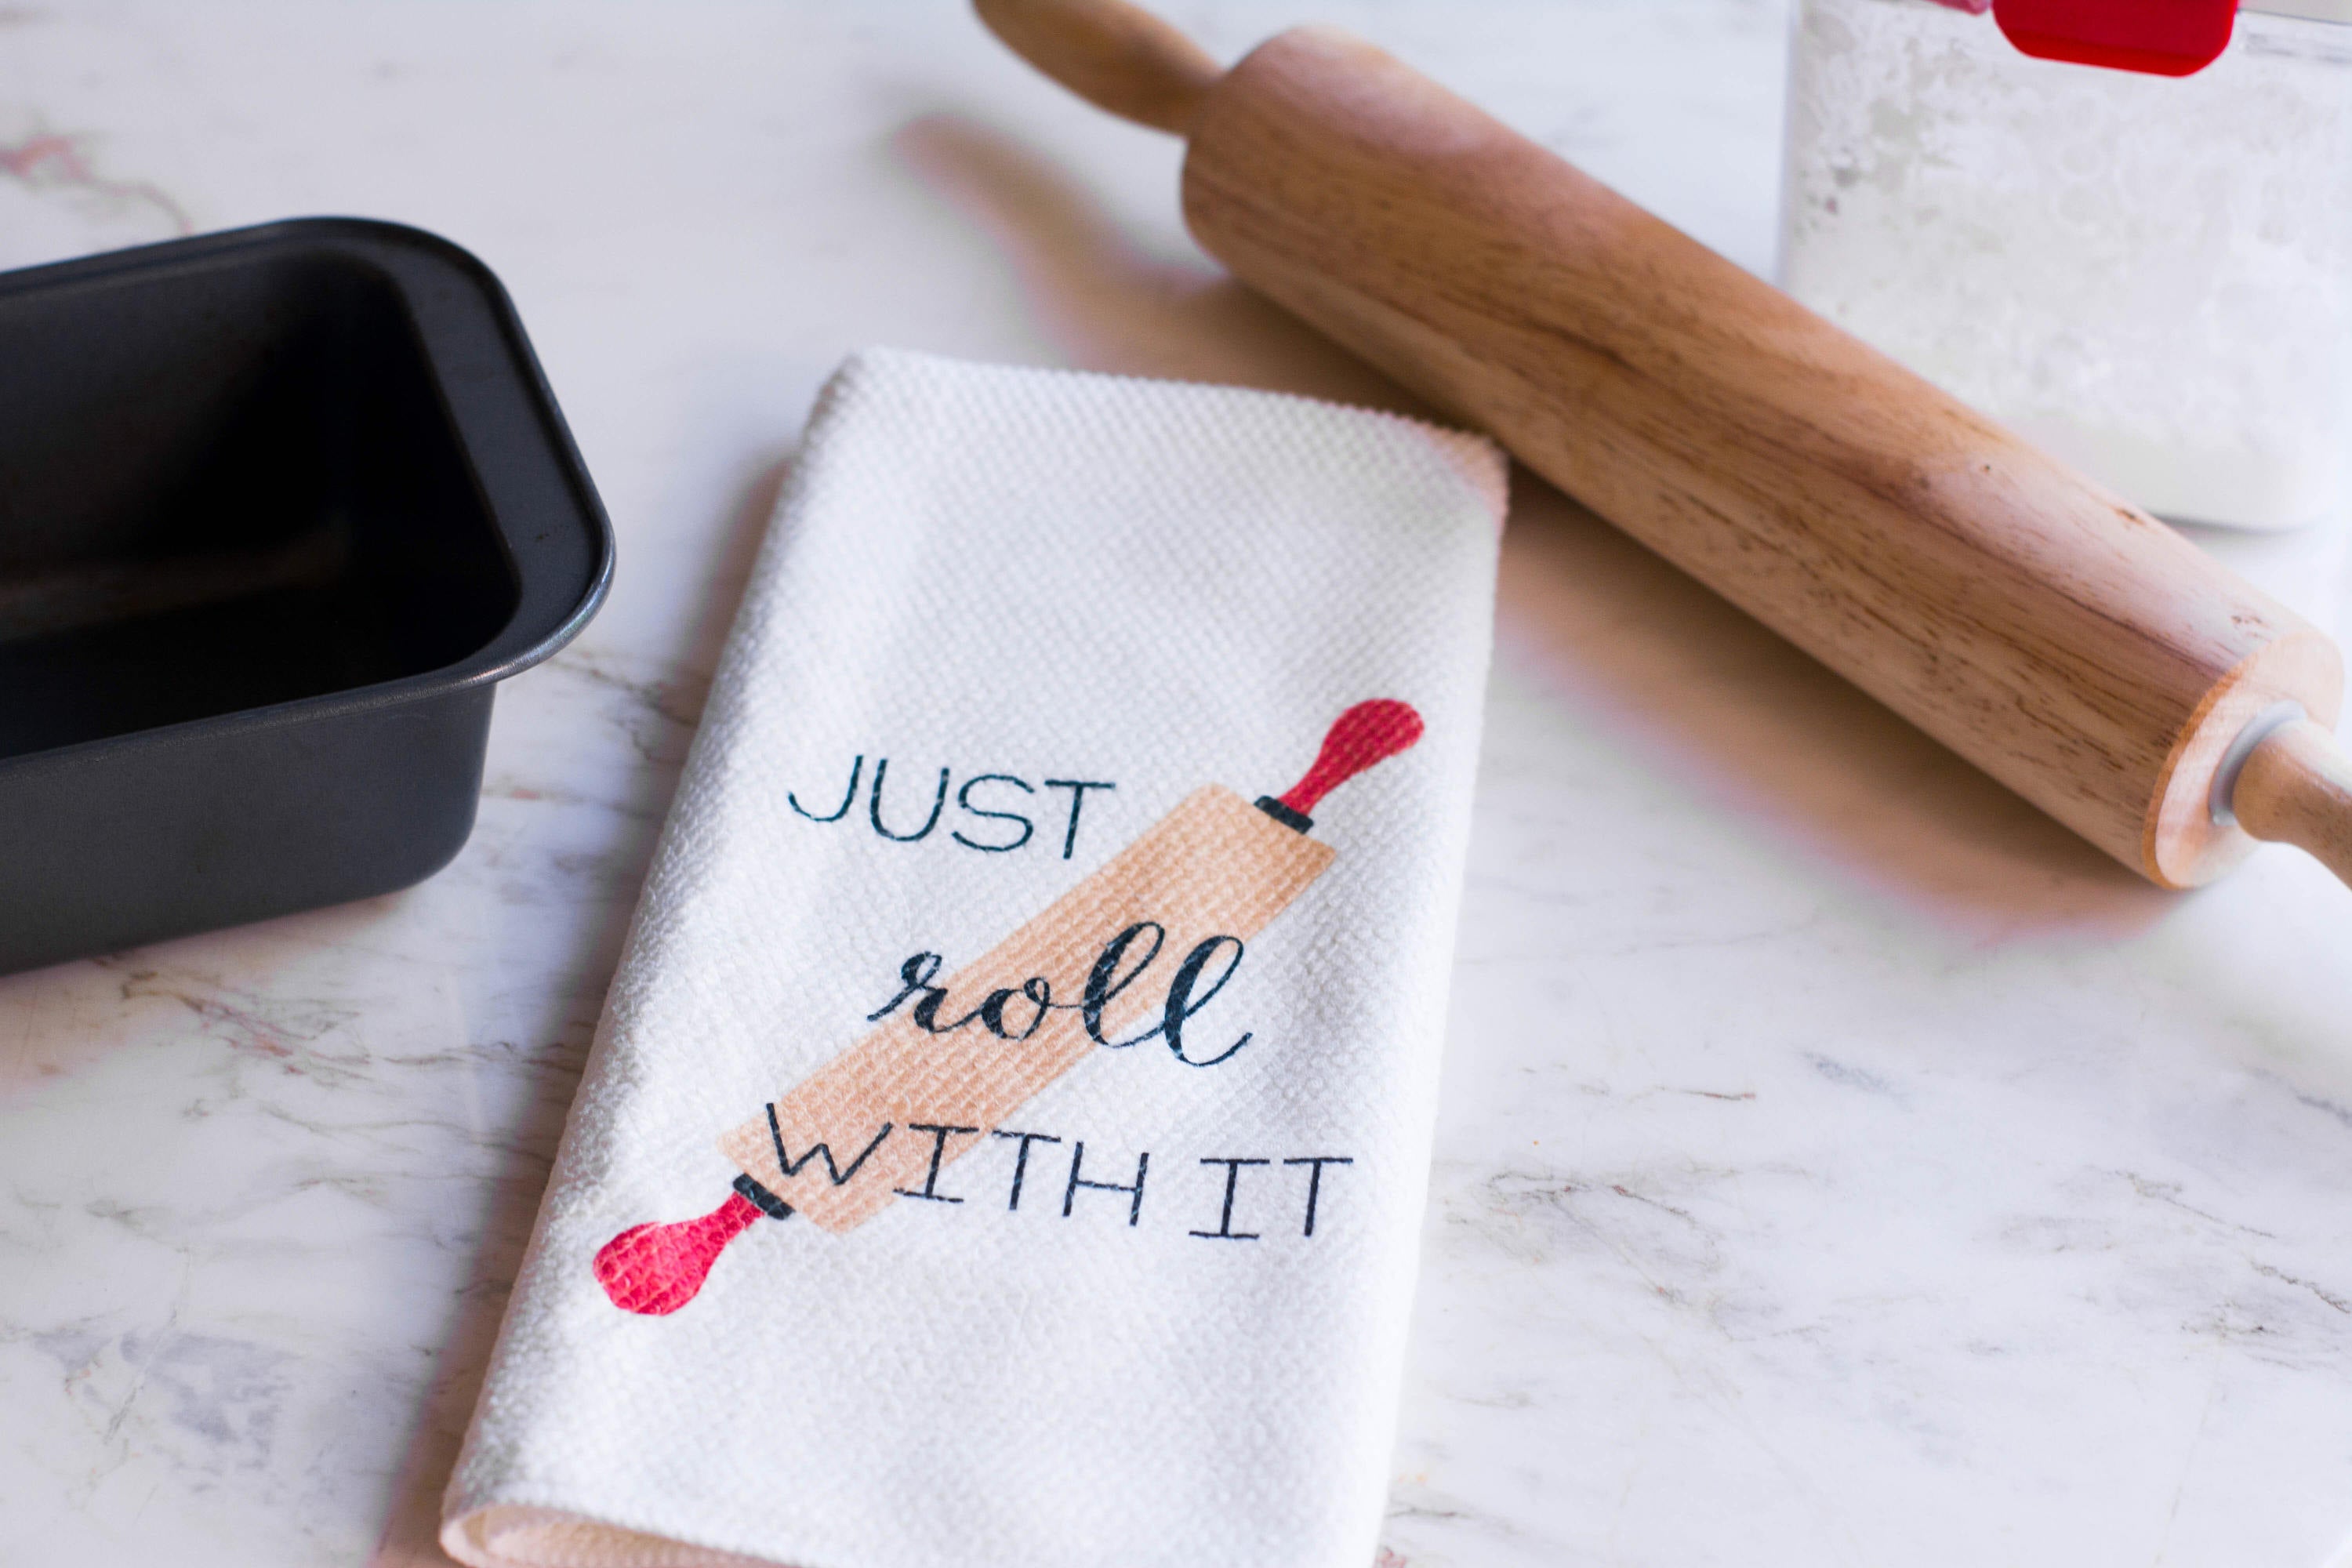 Pin on funny kitchen gifts